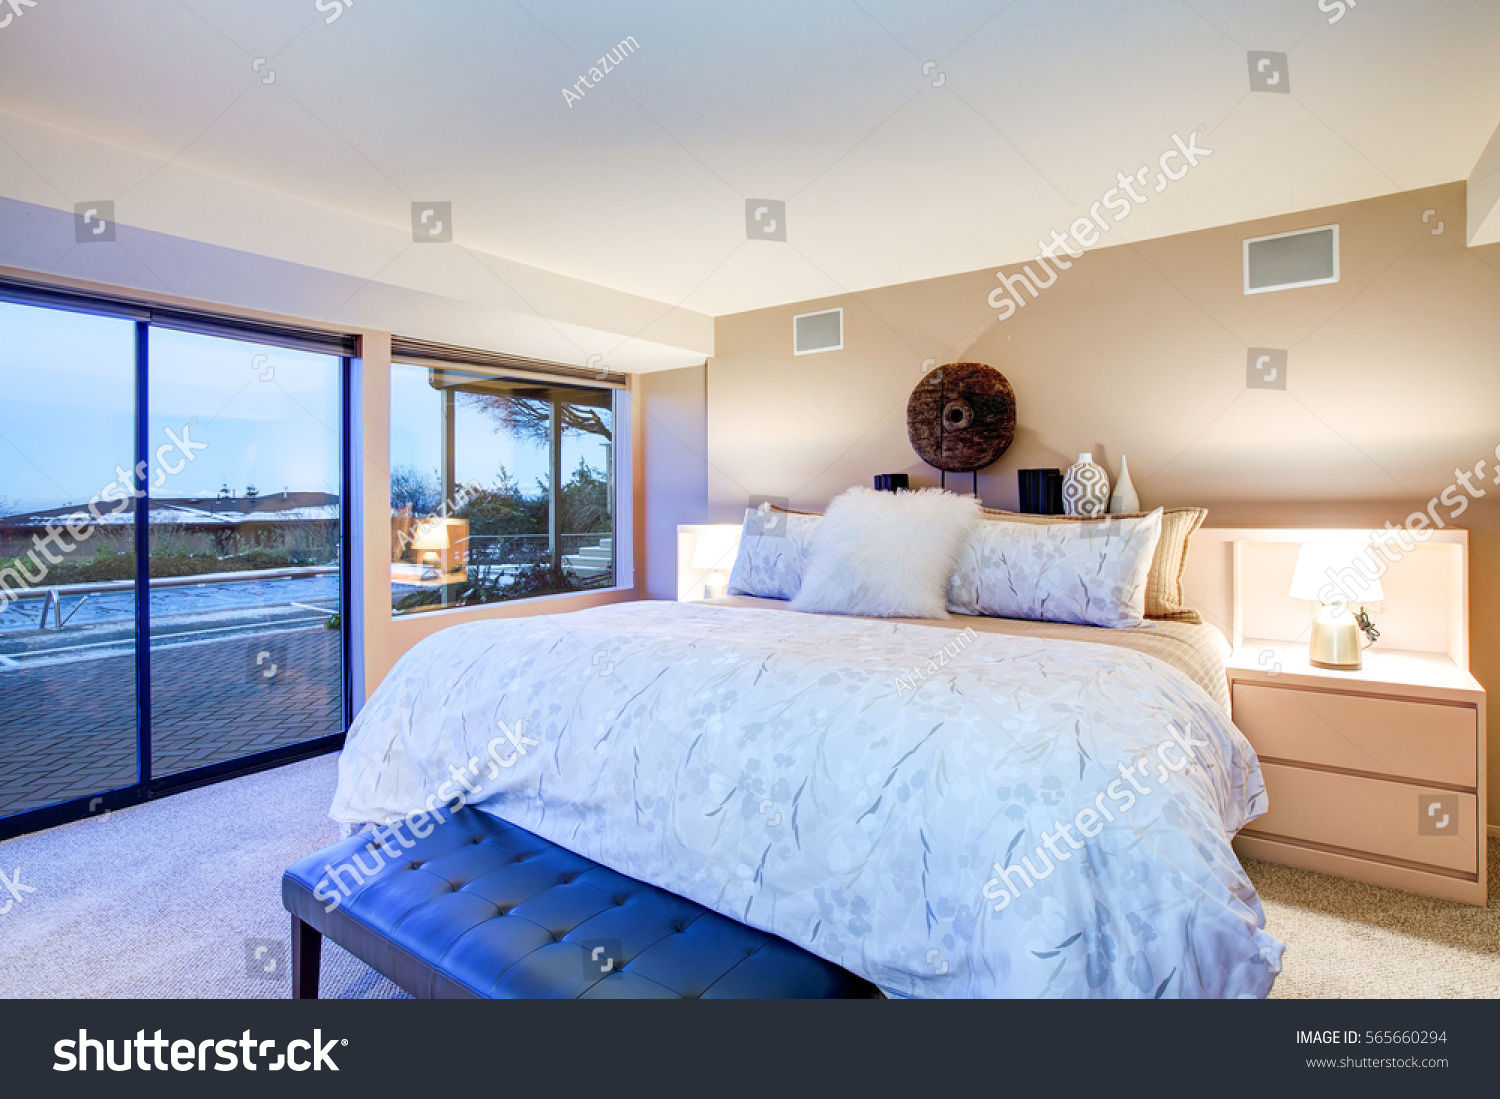 Lovely Bedroom Design Soft Peach Walls Stock Photo Edit Now 565660294